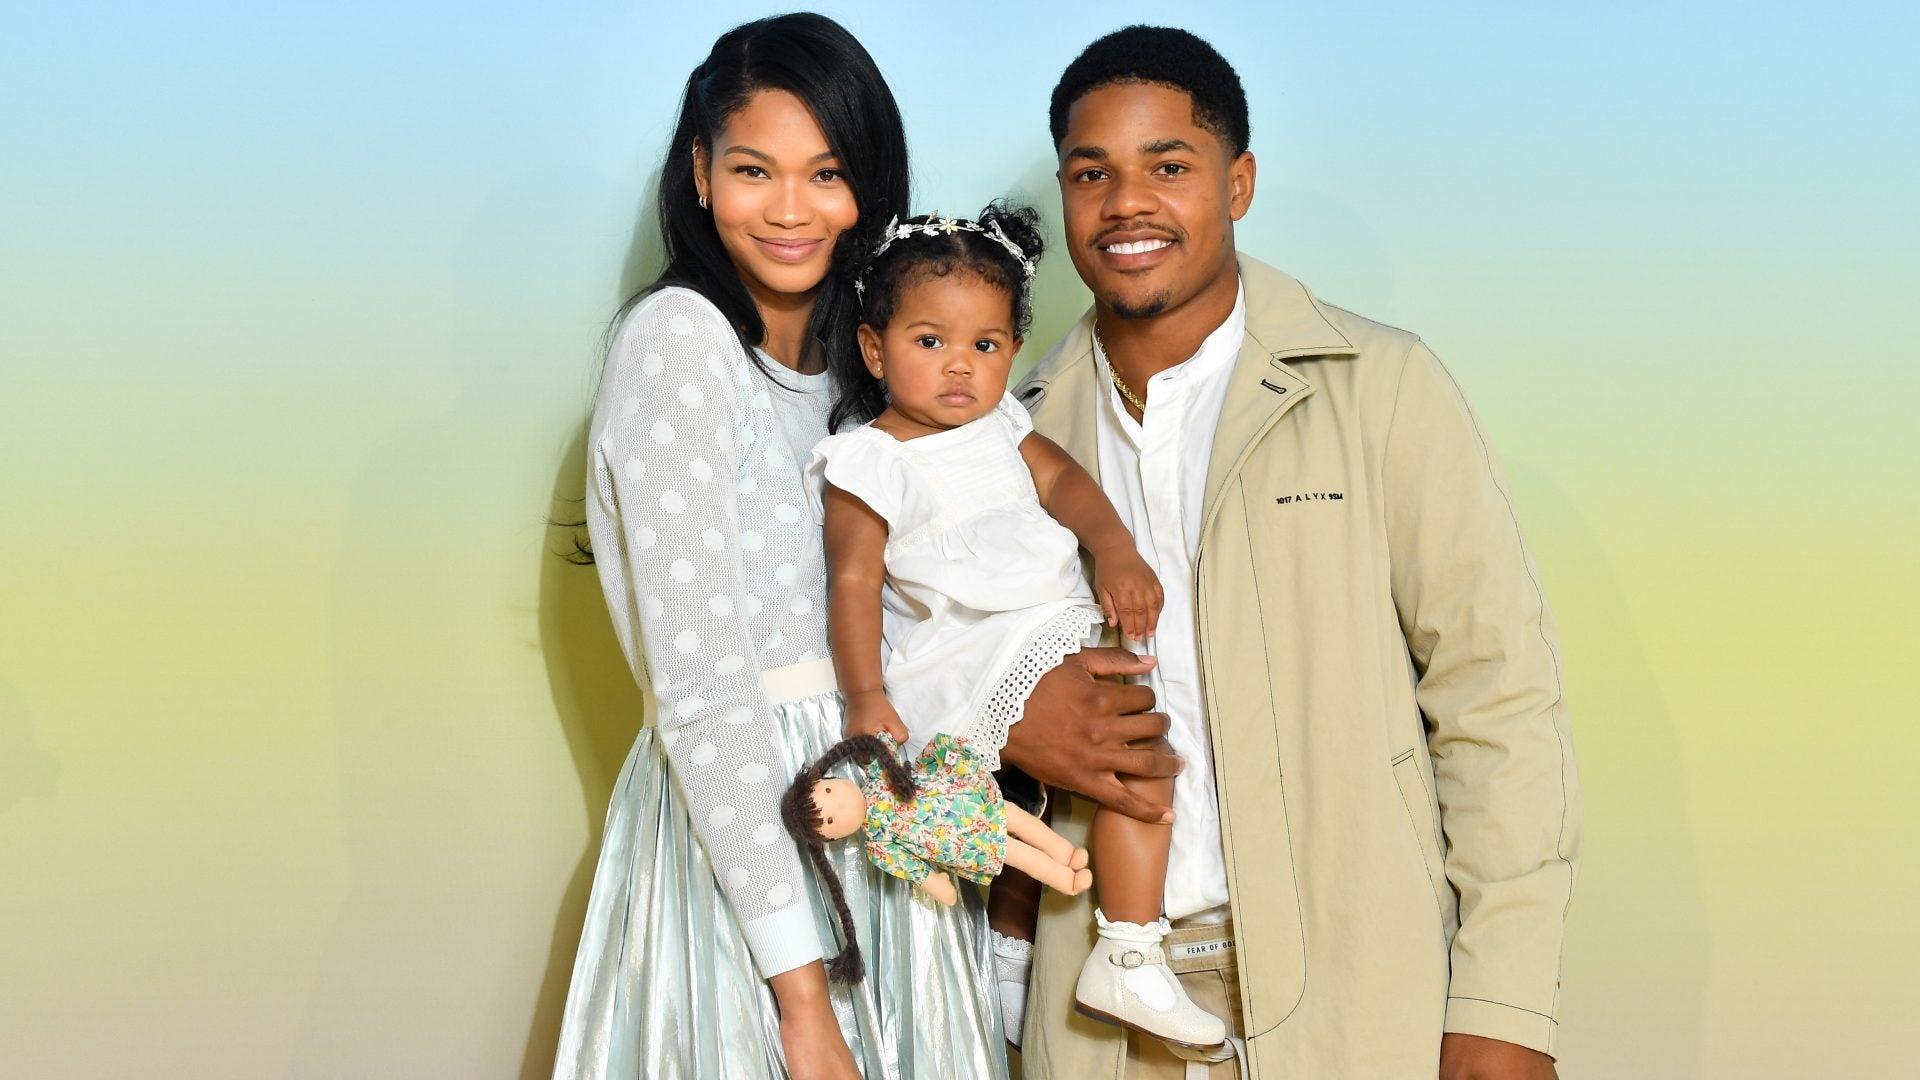 Chanel Iman and Husband Sterling Shepard Are Expecting Their Second Child